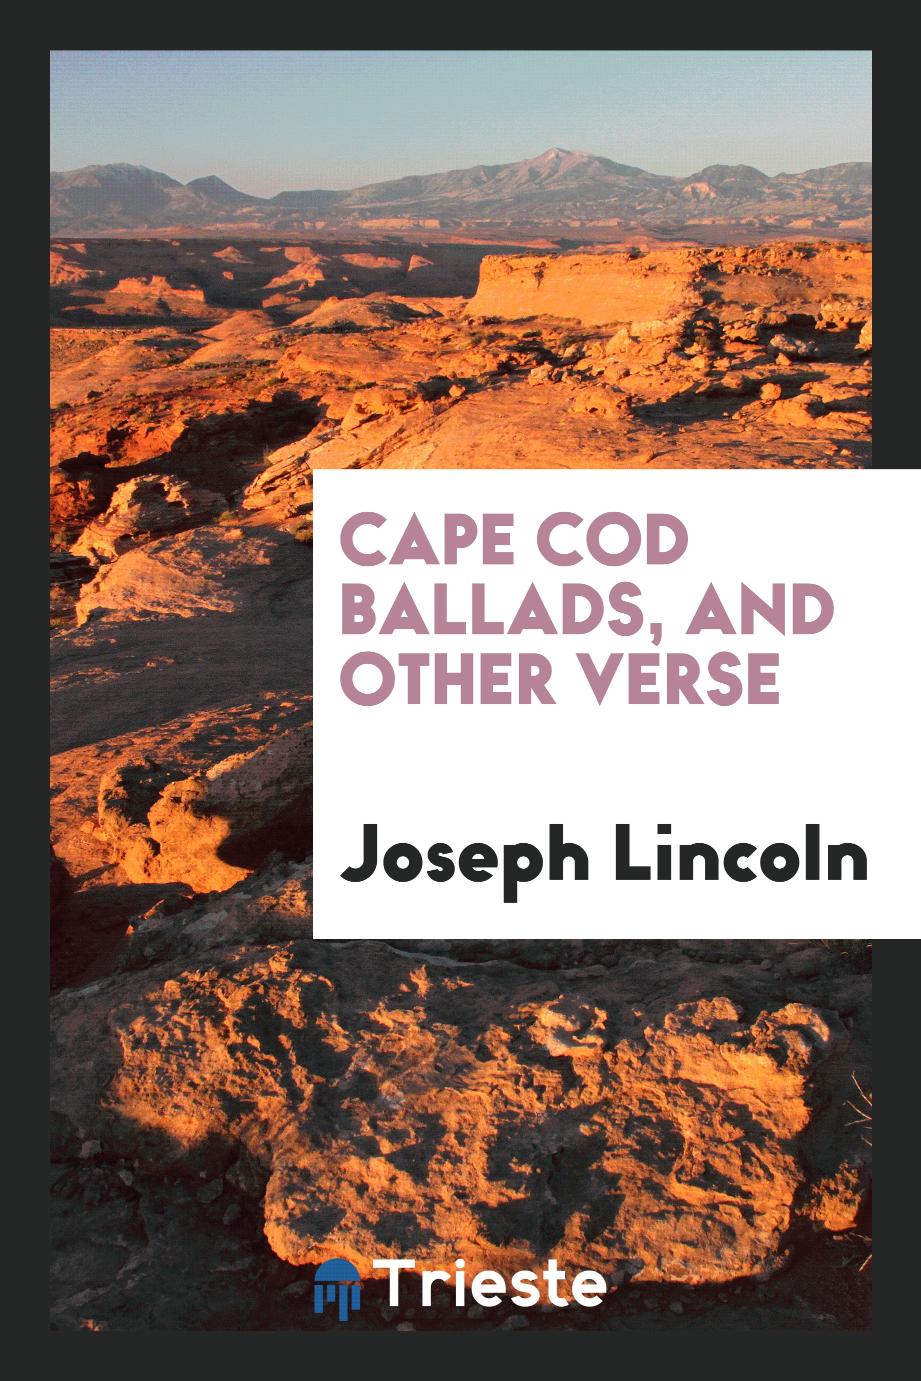 Cape Cod ballads, and other verse